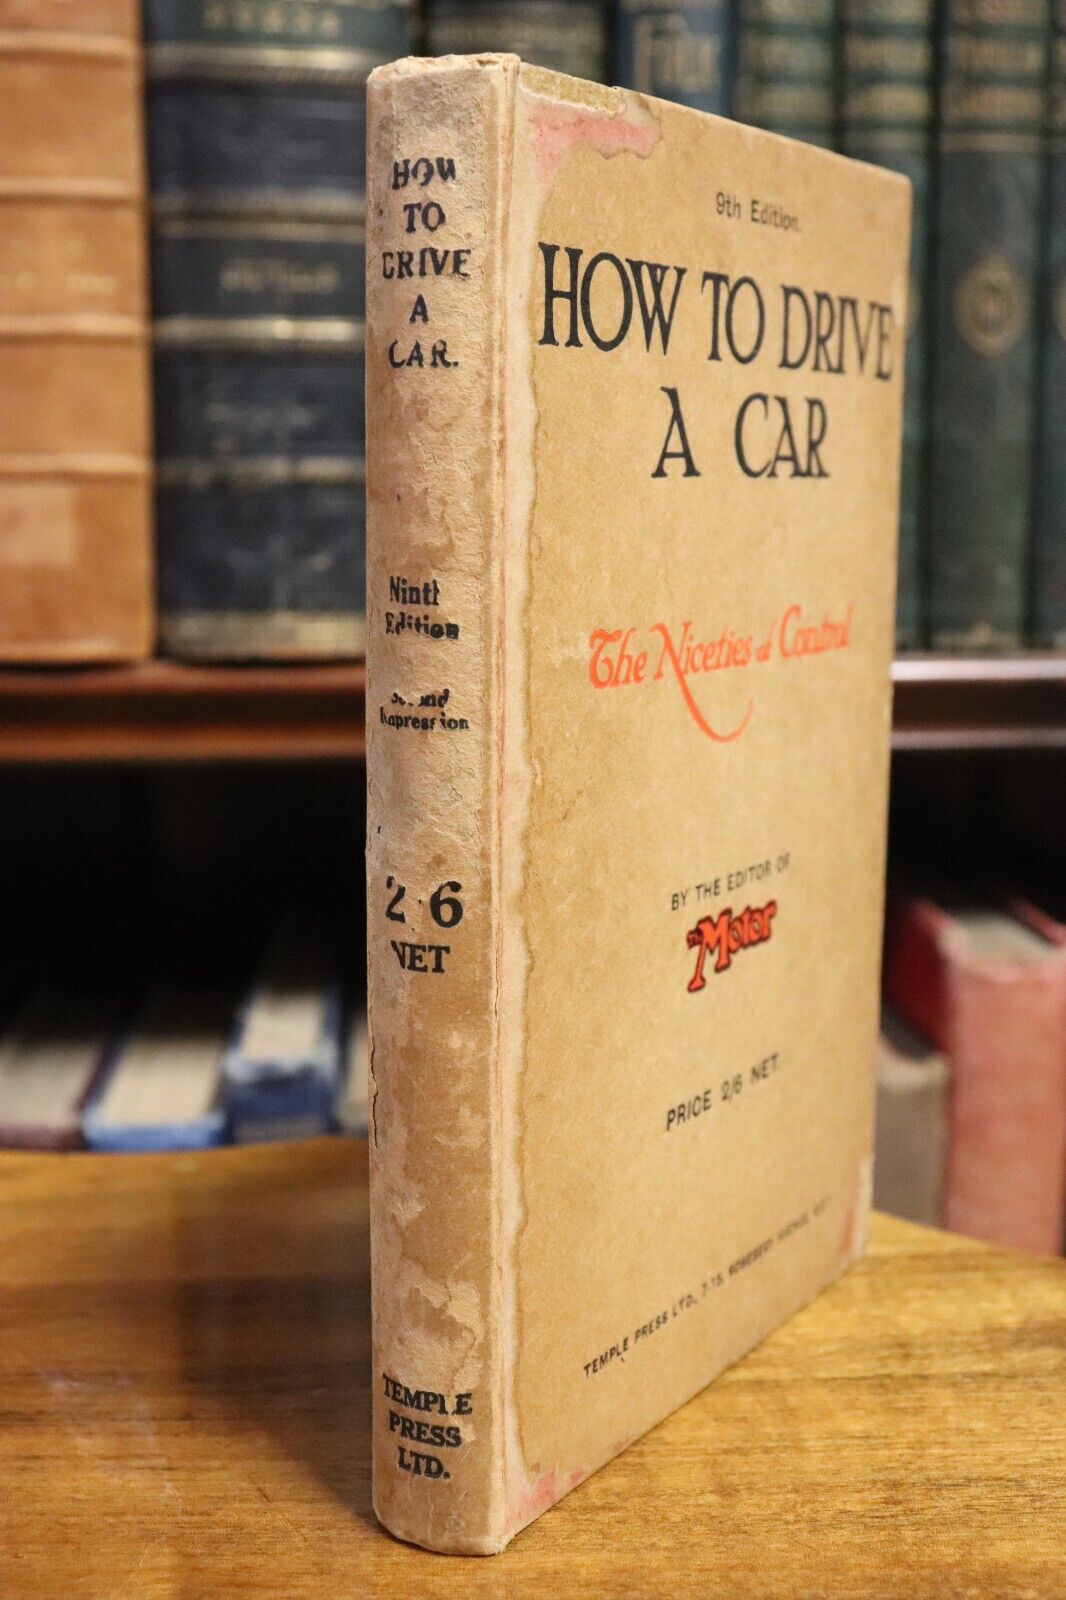 How To Drive A Car by Editors Of The Motor - c1925 - Automotive History Book